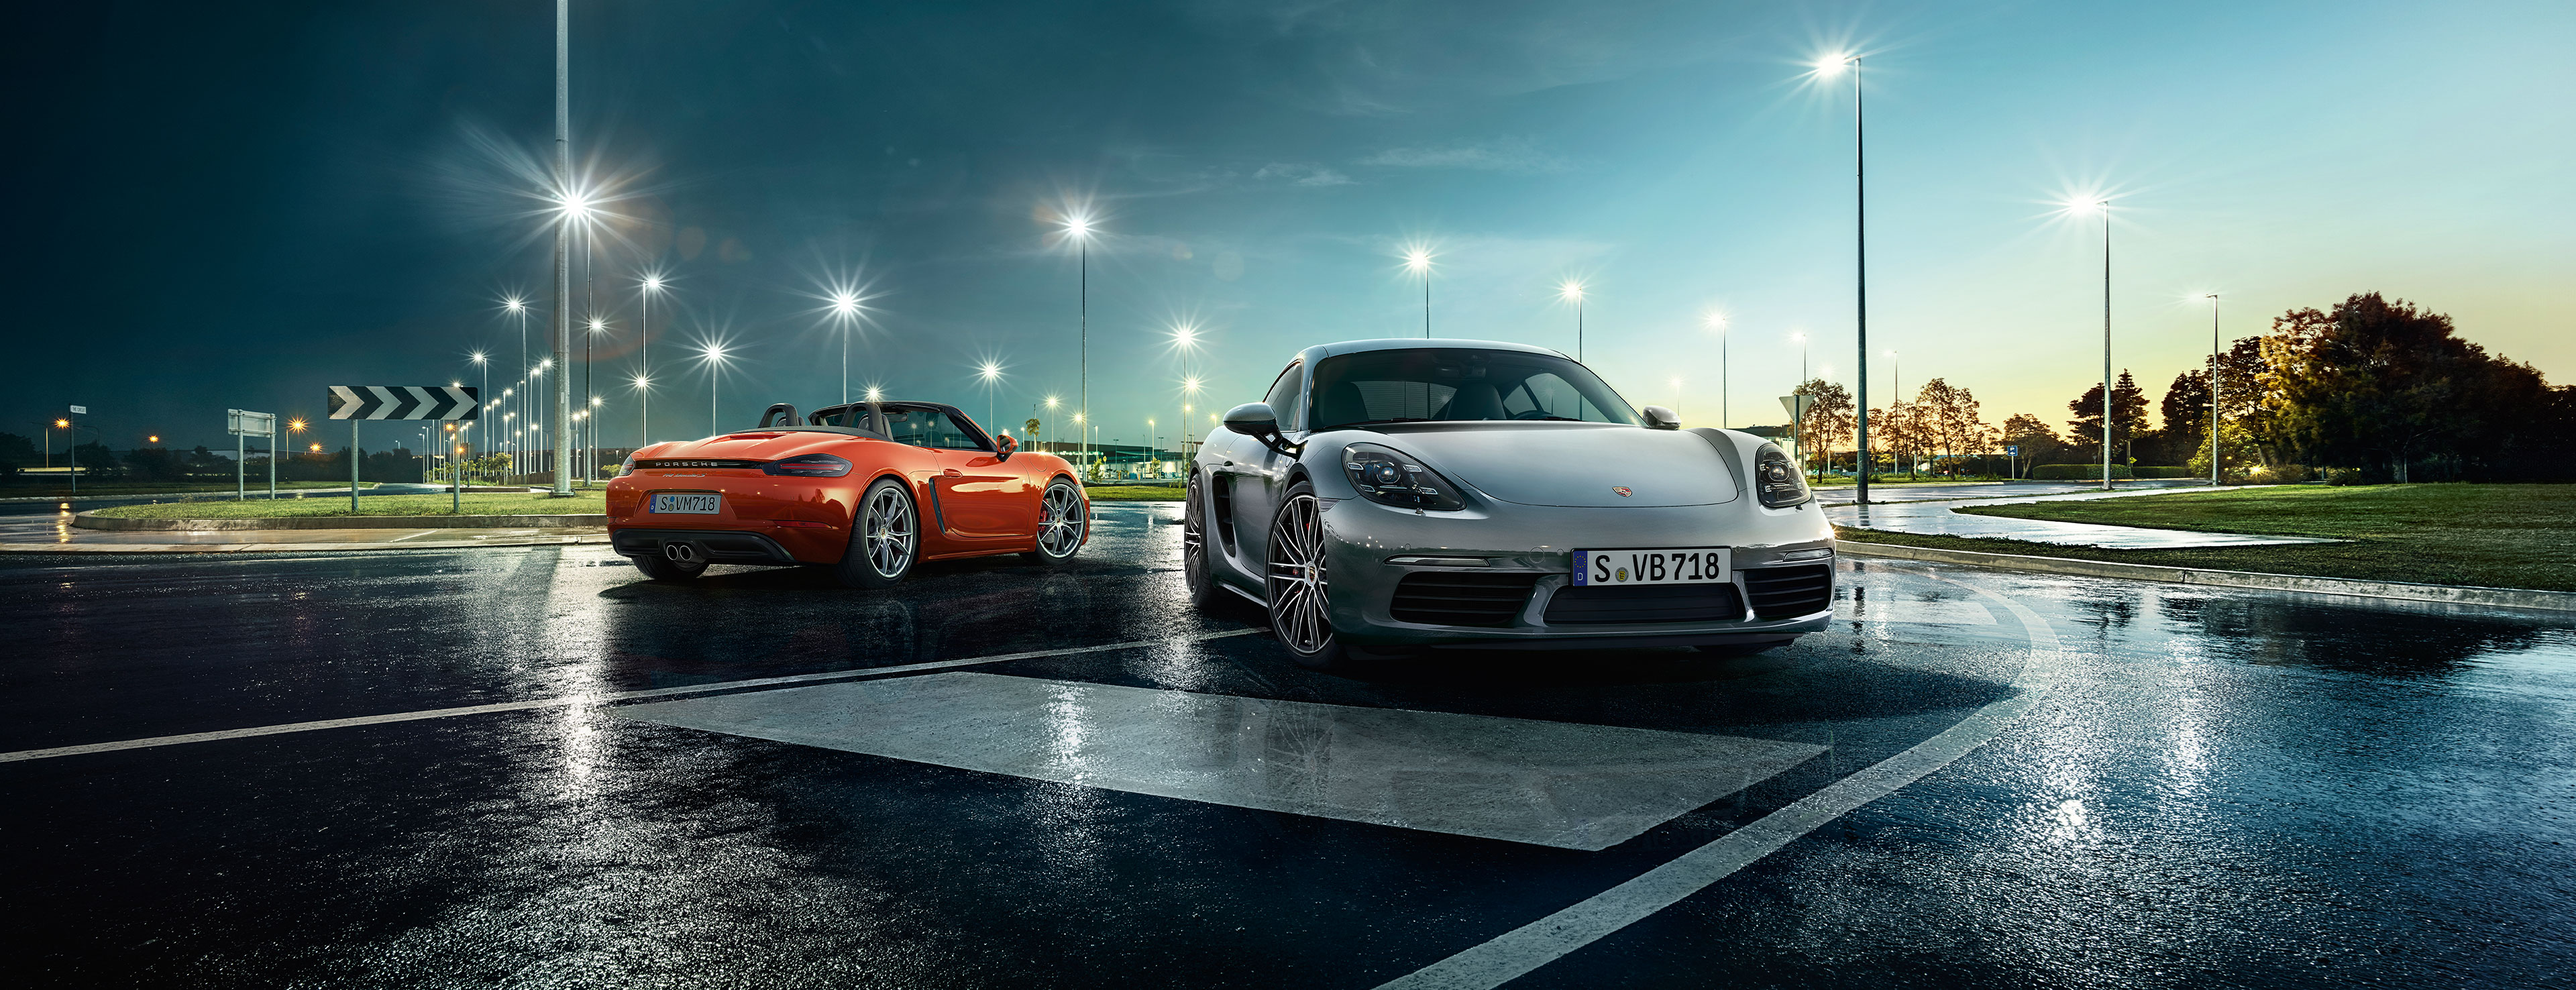 718 Cayman and 718 Boxster models